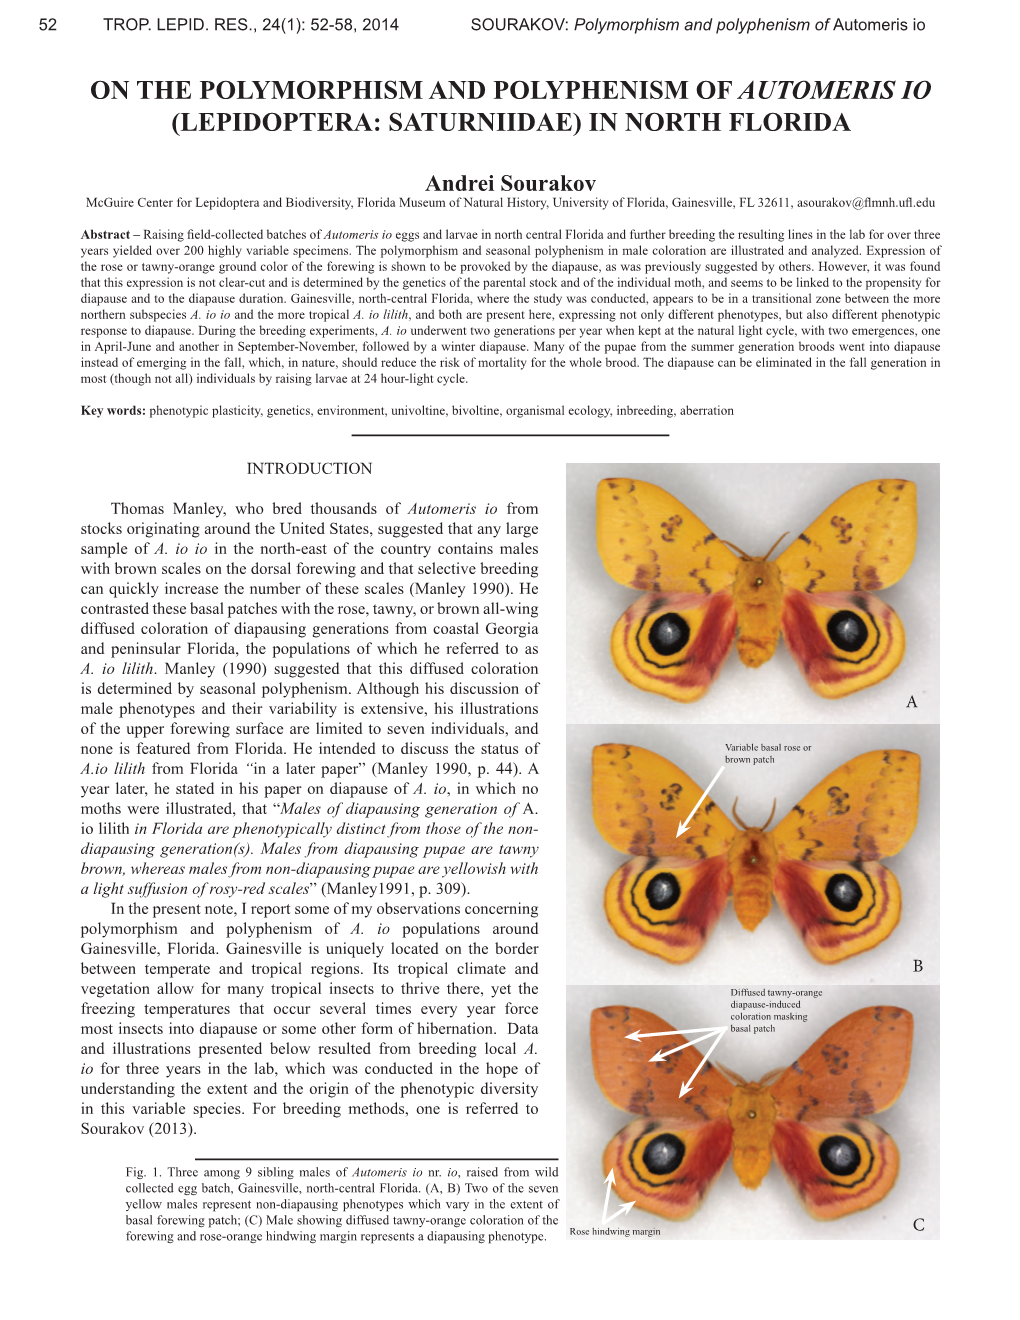 On the Polymorphism and Polyphenism of Automeris Io (Lepidoptera: Saturniidae) in North Florida